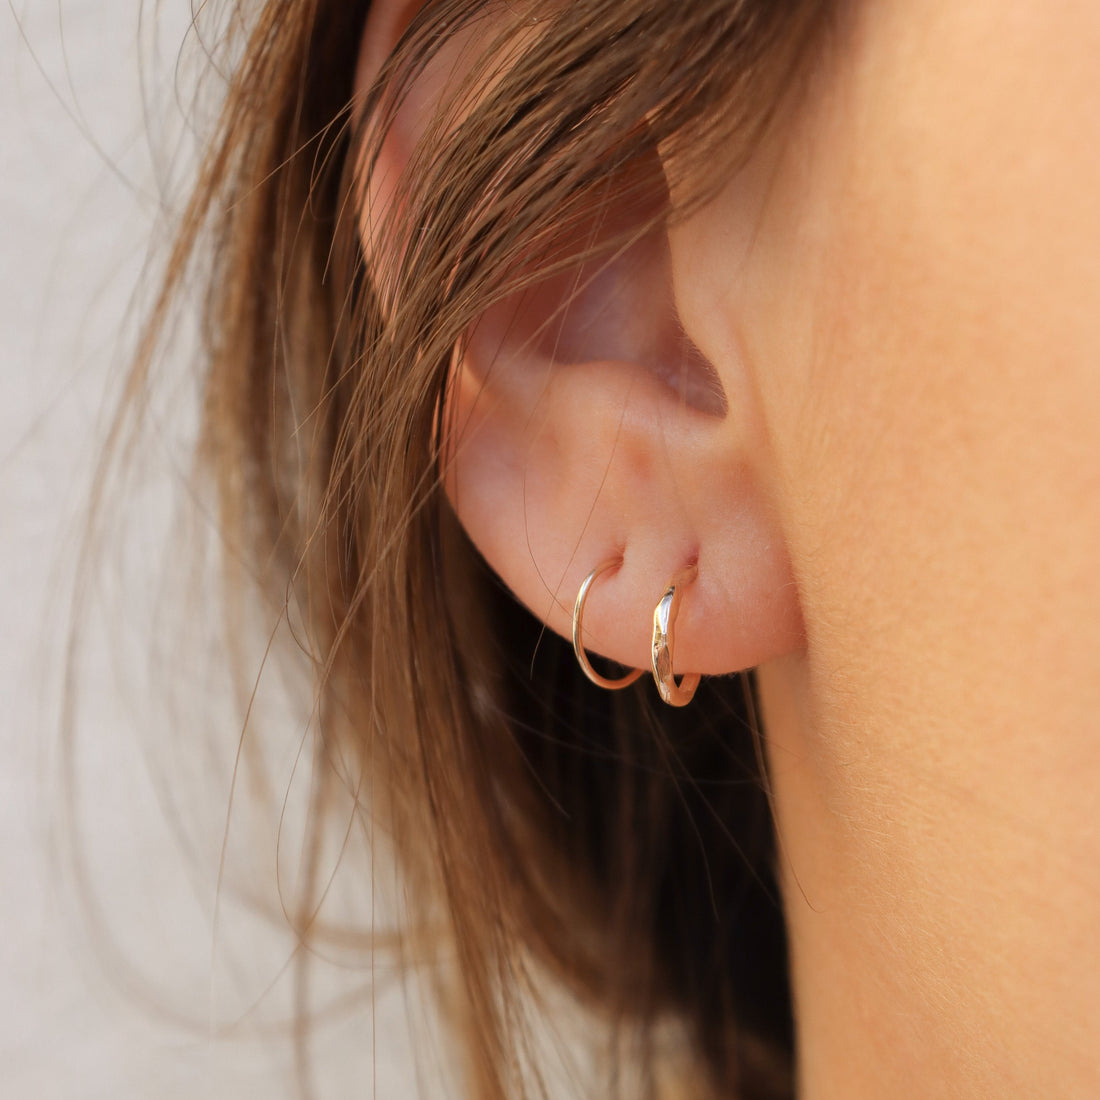 An ear wearing two different hoops to show the thickness of each side by side